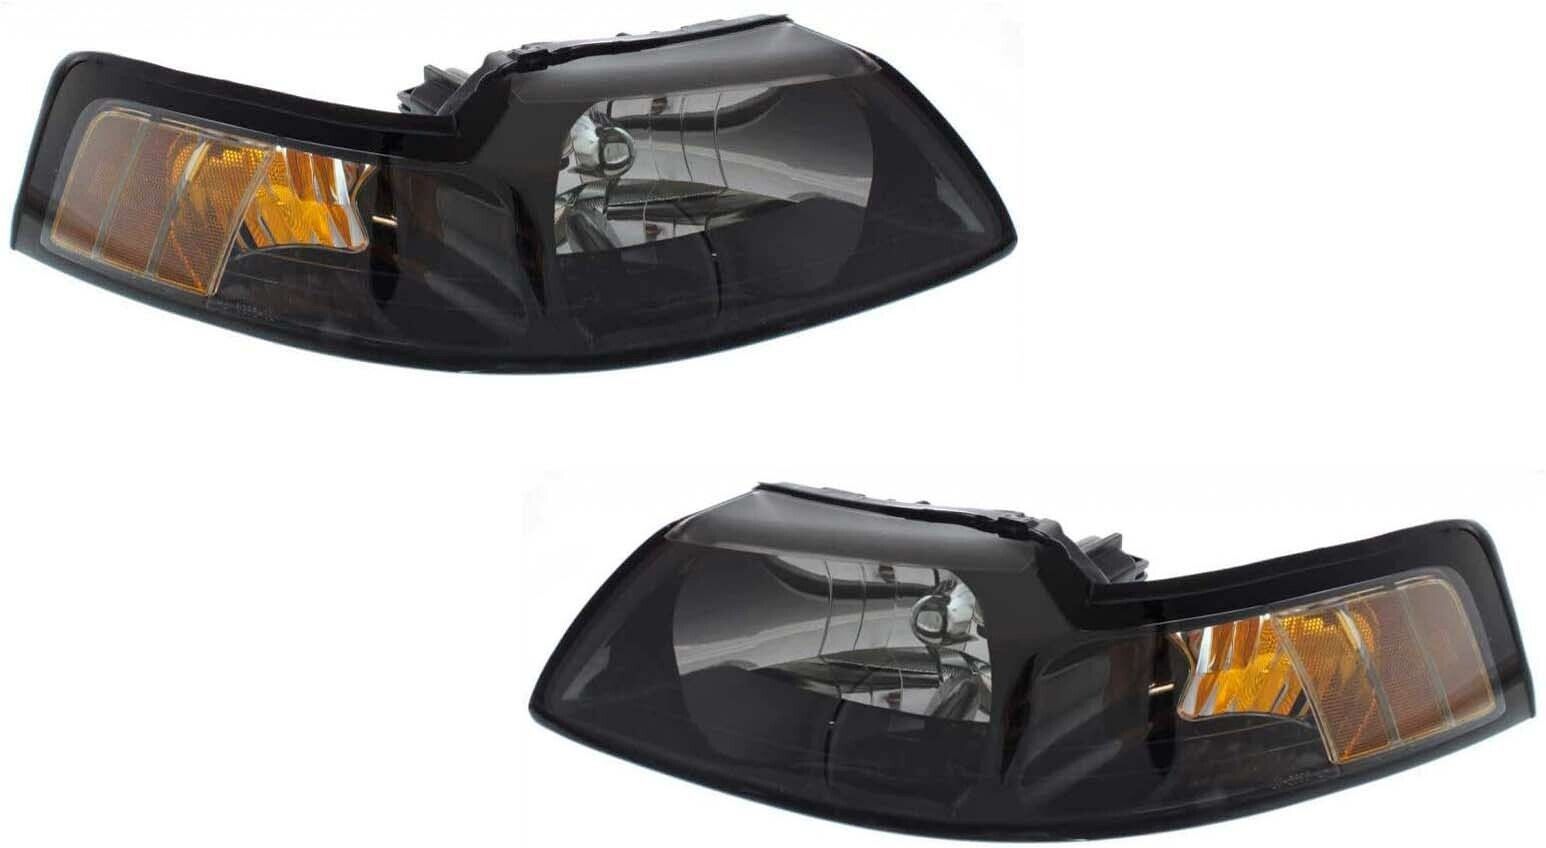 Primary image for Headlights For Ford Mustang 1999 2000 2001 2002 2003 2004 Black Trim Pair